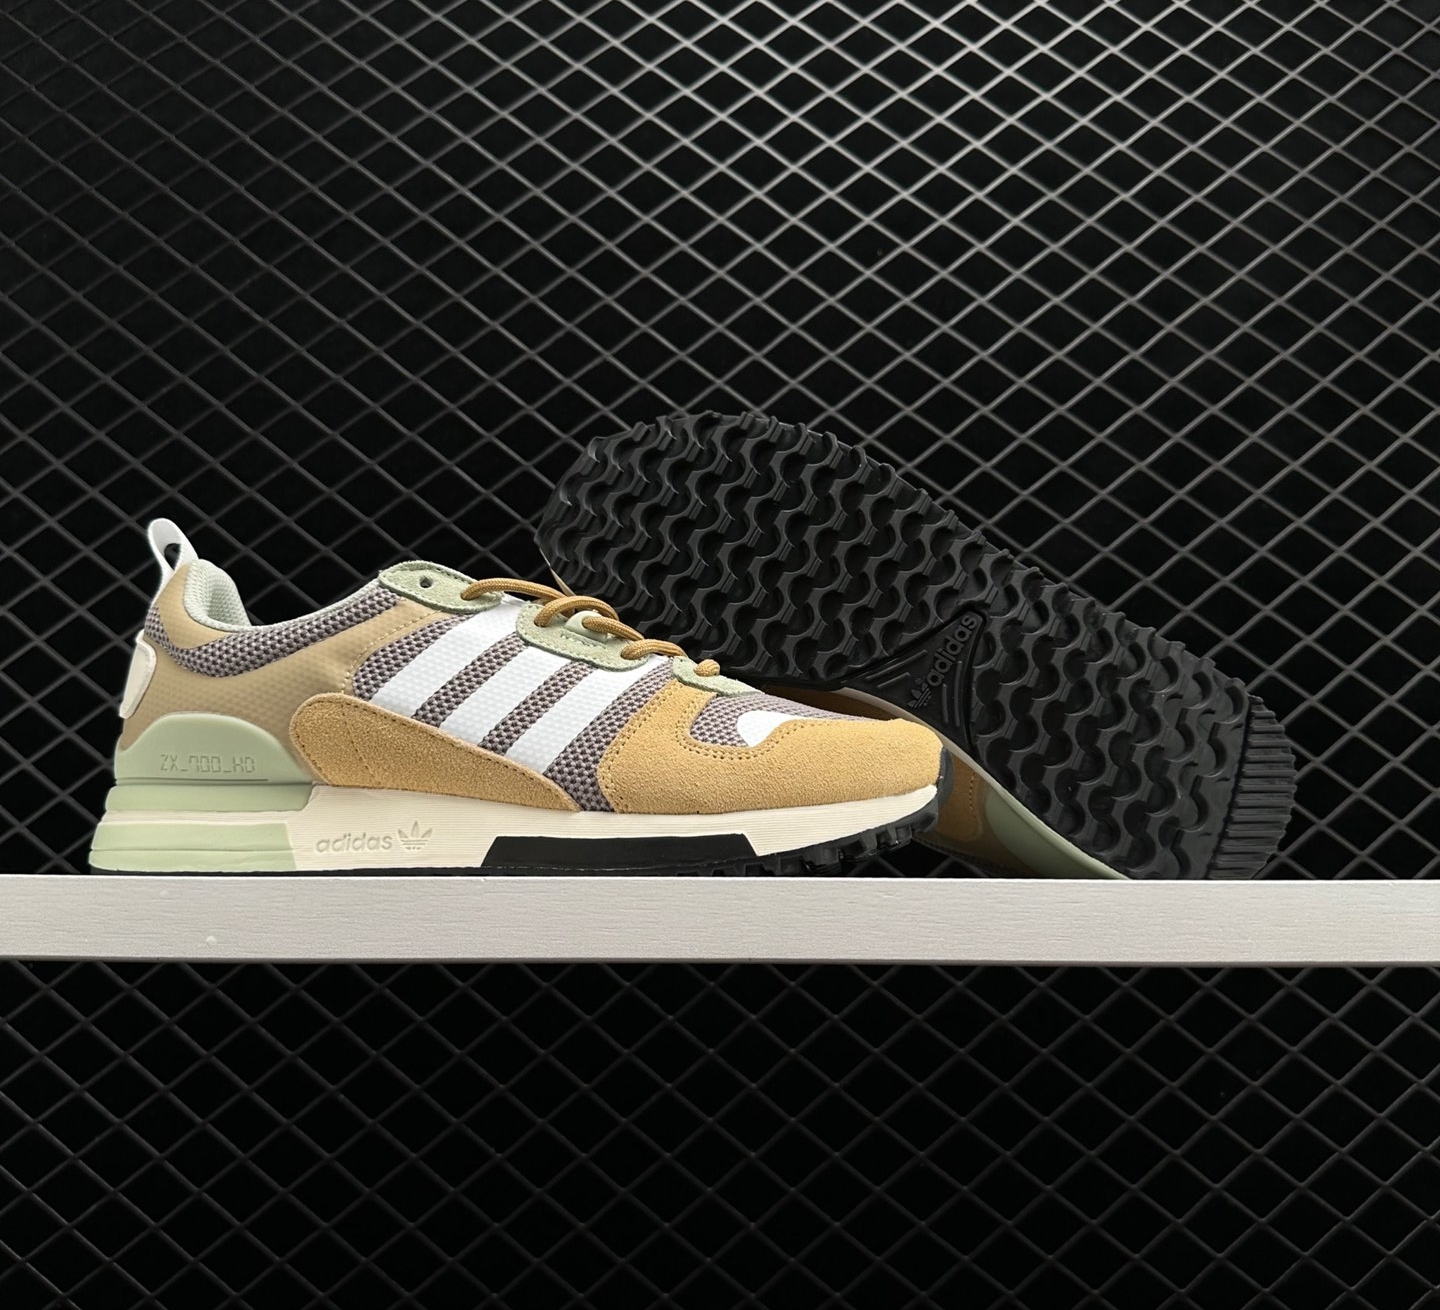 Adidas Originals ZX 700 HD SHOES Beige Off White Feather Grey H01849